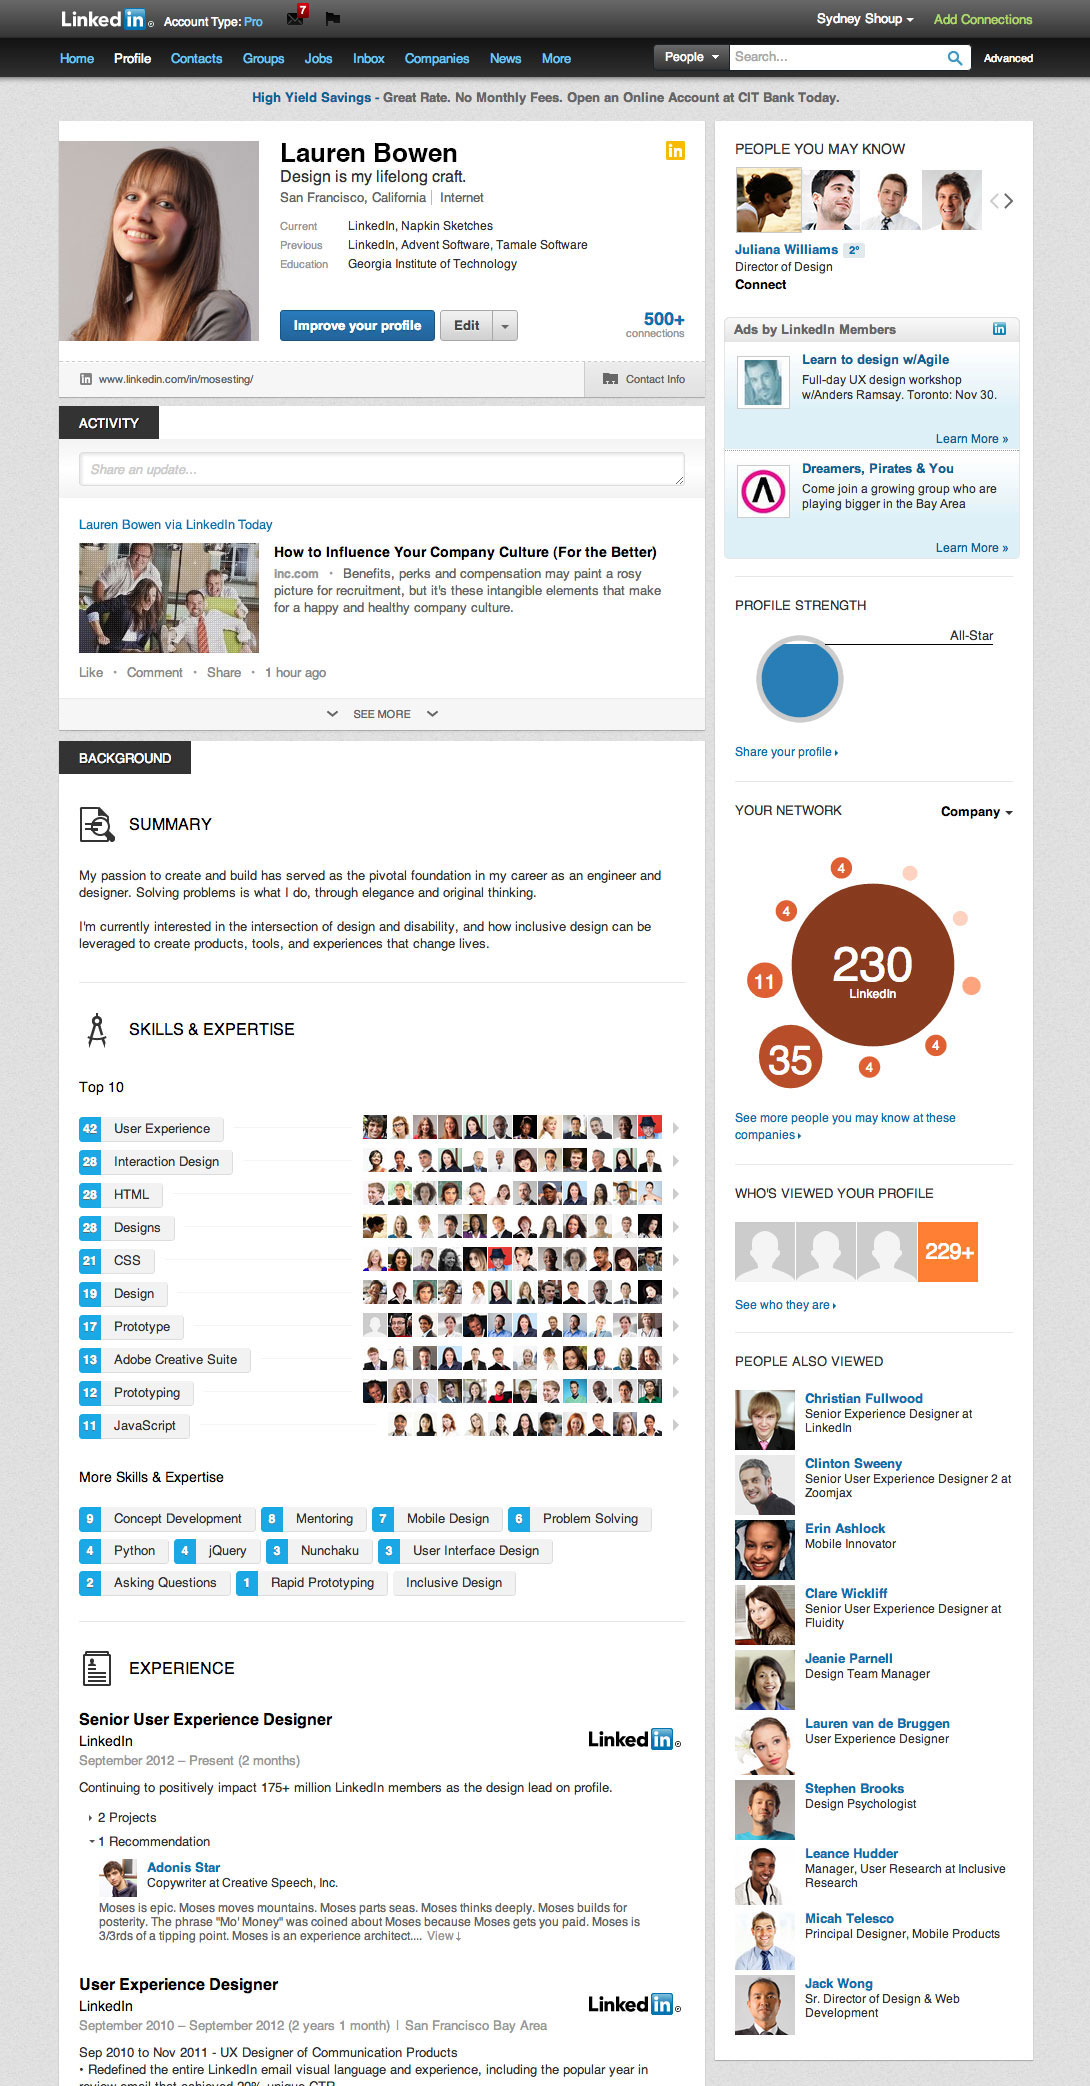 With 32M Members, LinkedIn Rolls Out New Profiles To Engage Networks